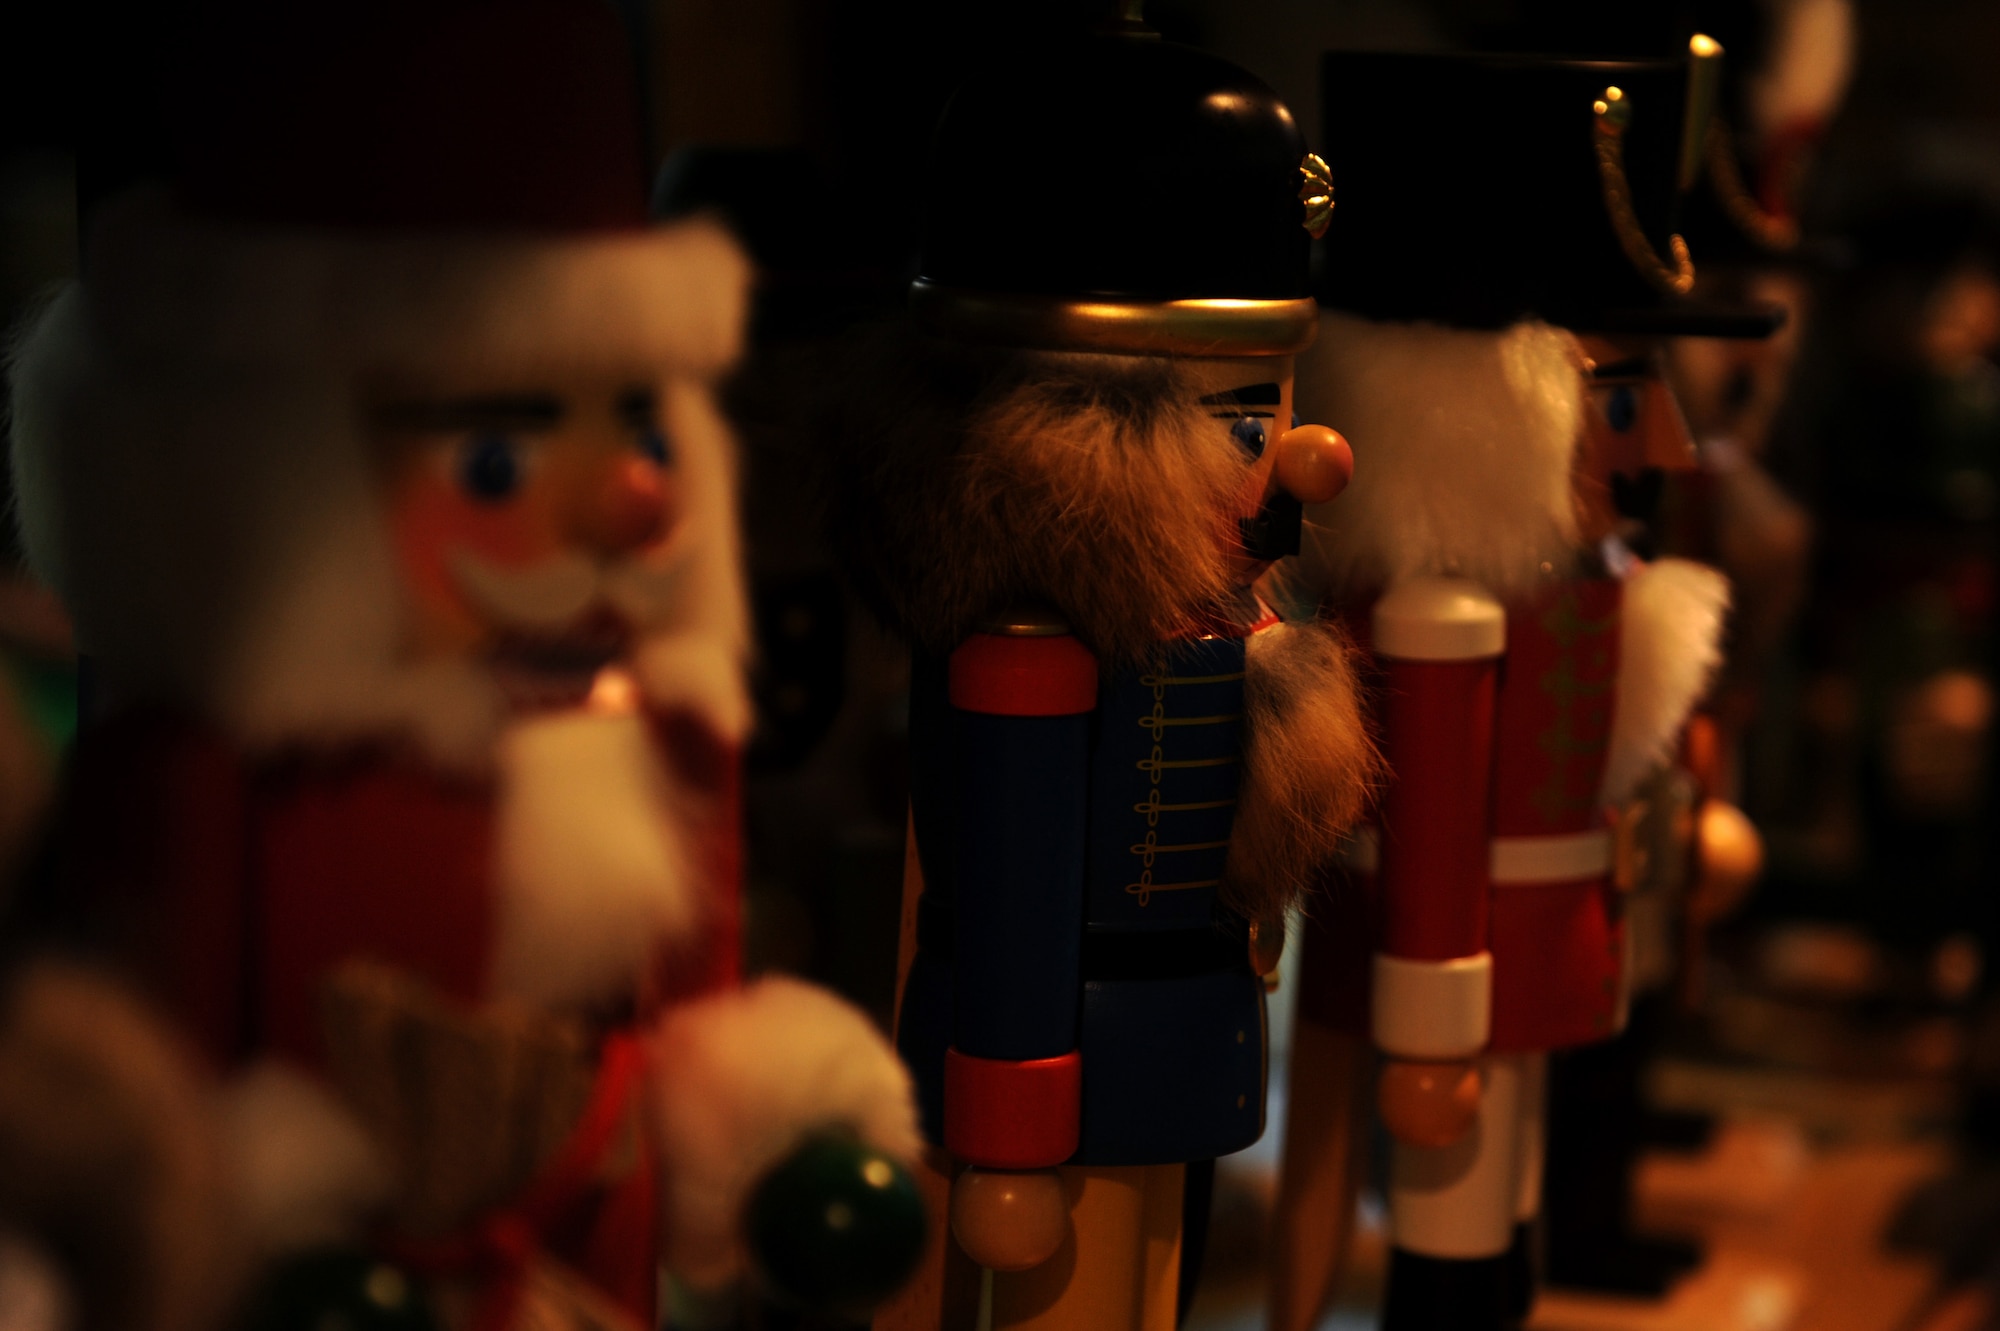 Wooden nutcrackers are displayed at a vendor’s stand during the 2014 Holiday Bazaar in Hangar 1 at Spangdahlem Air Base, Germany, Oct. 25, 2014. The bazaar hosted products from various vendors in different parts of Europe. (U.S. Air Force photo by Airman 1st Class Timothy Kim/Released)